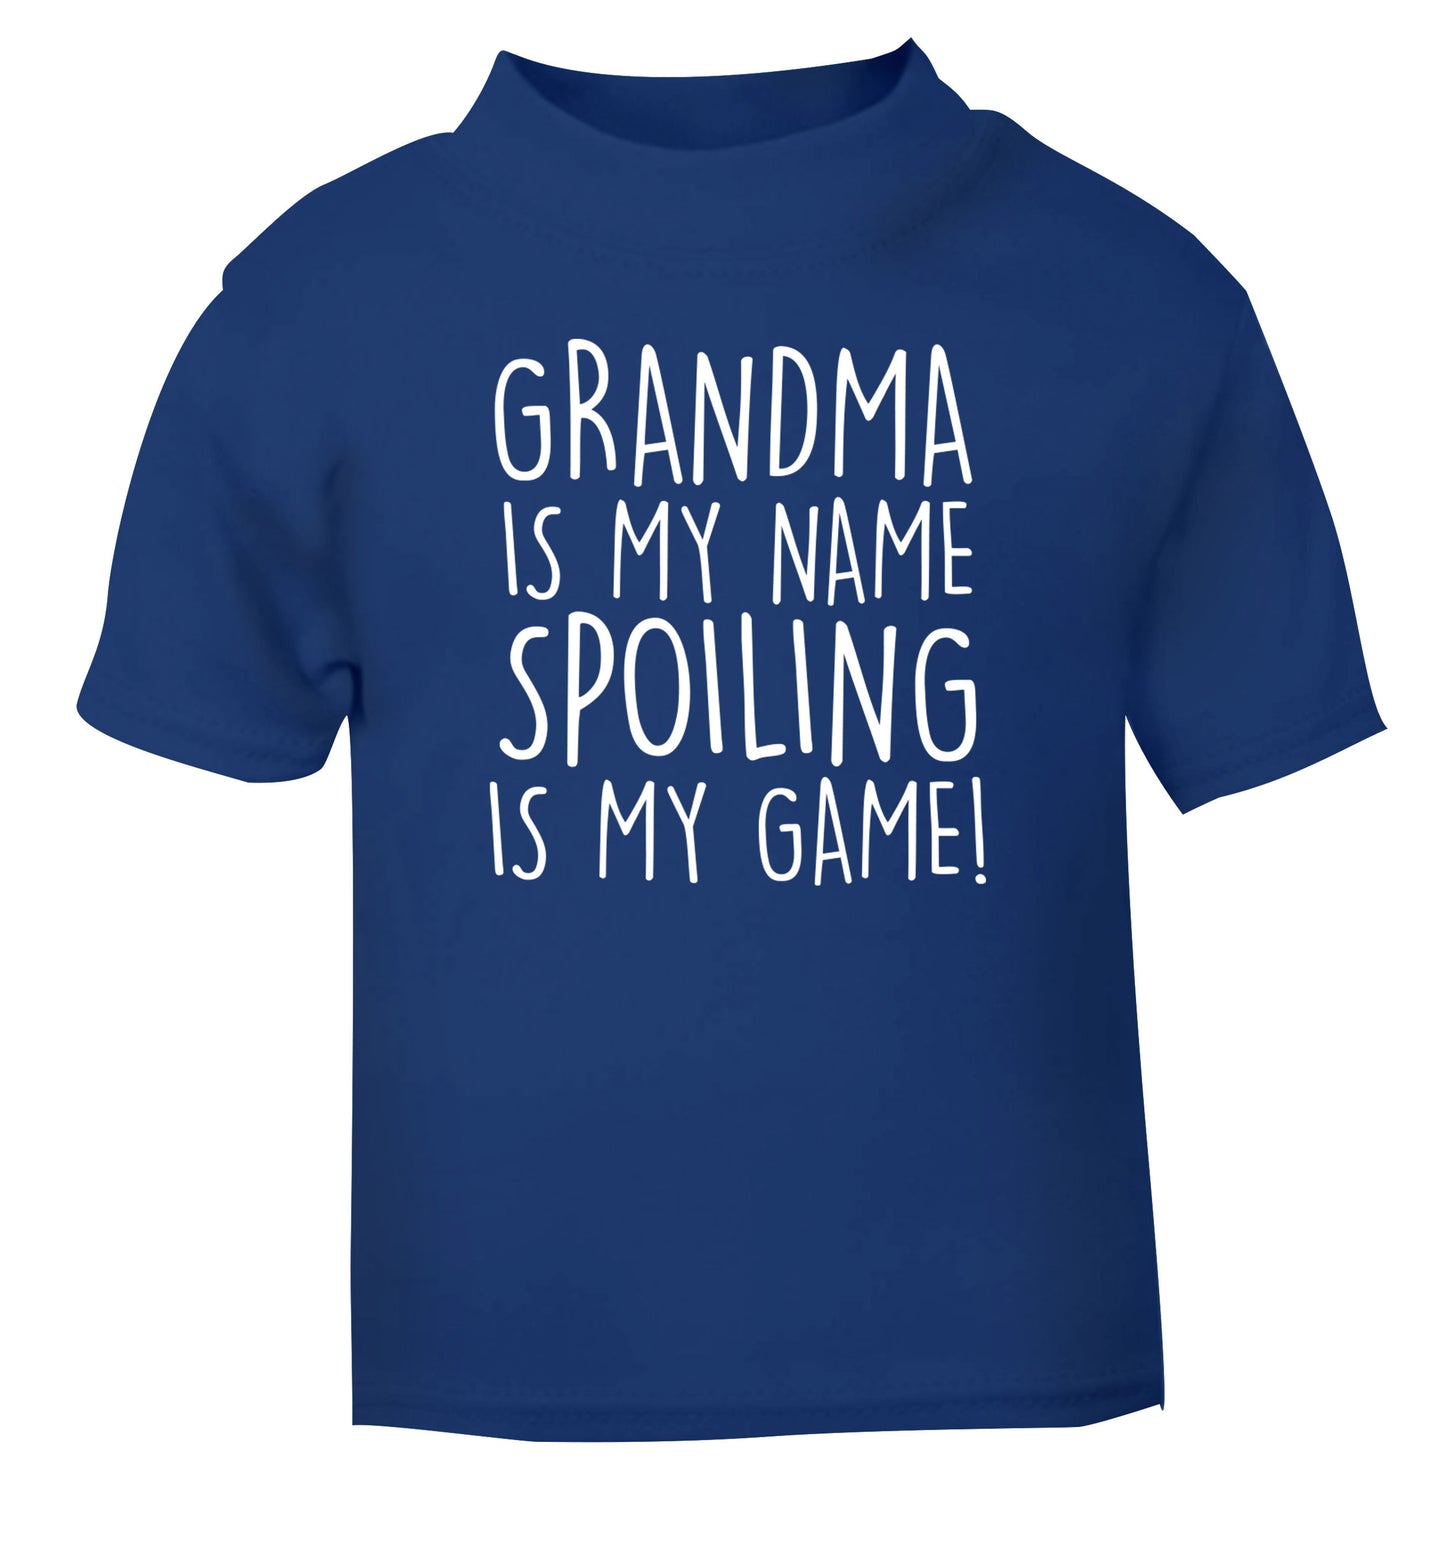 Grandma is my name, spoiling is my game blue Baby Toddler Tshirt 2 Years